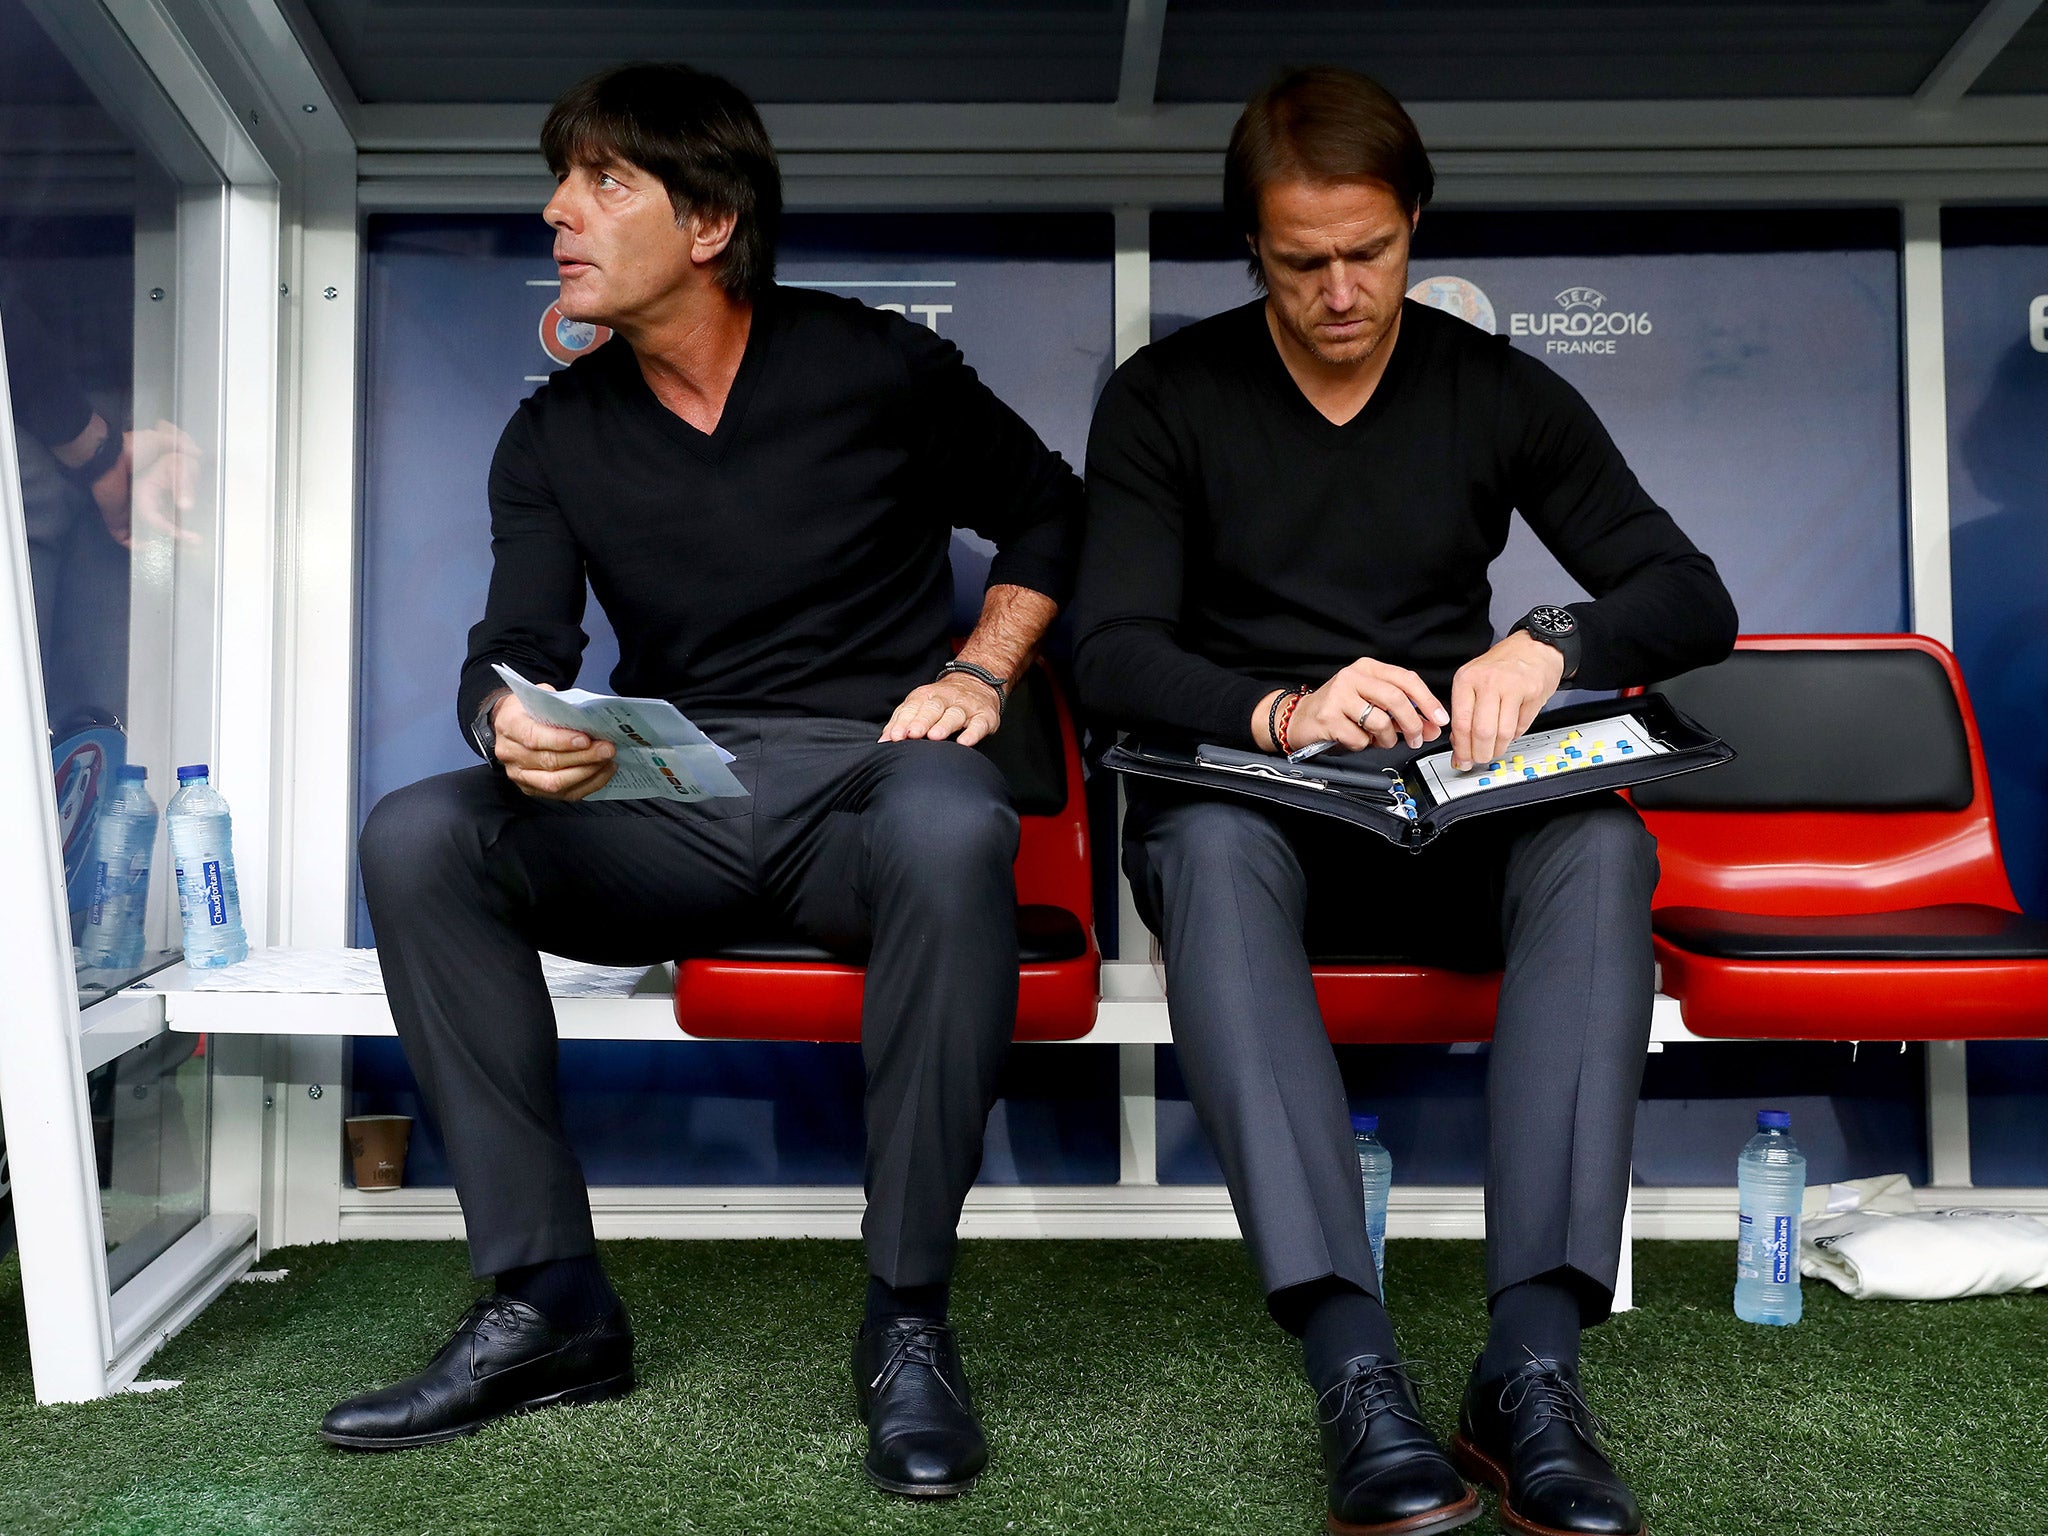 Joachim Low was not satisfied despite the 3-0 win over Slovakia